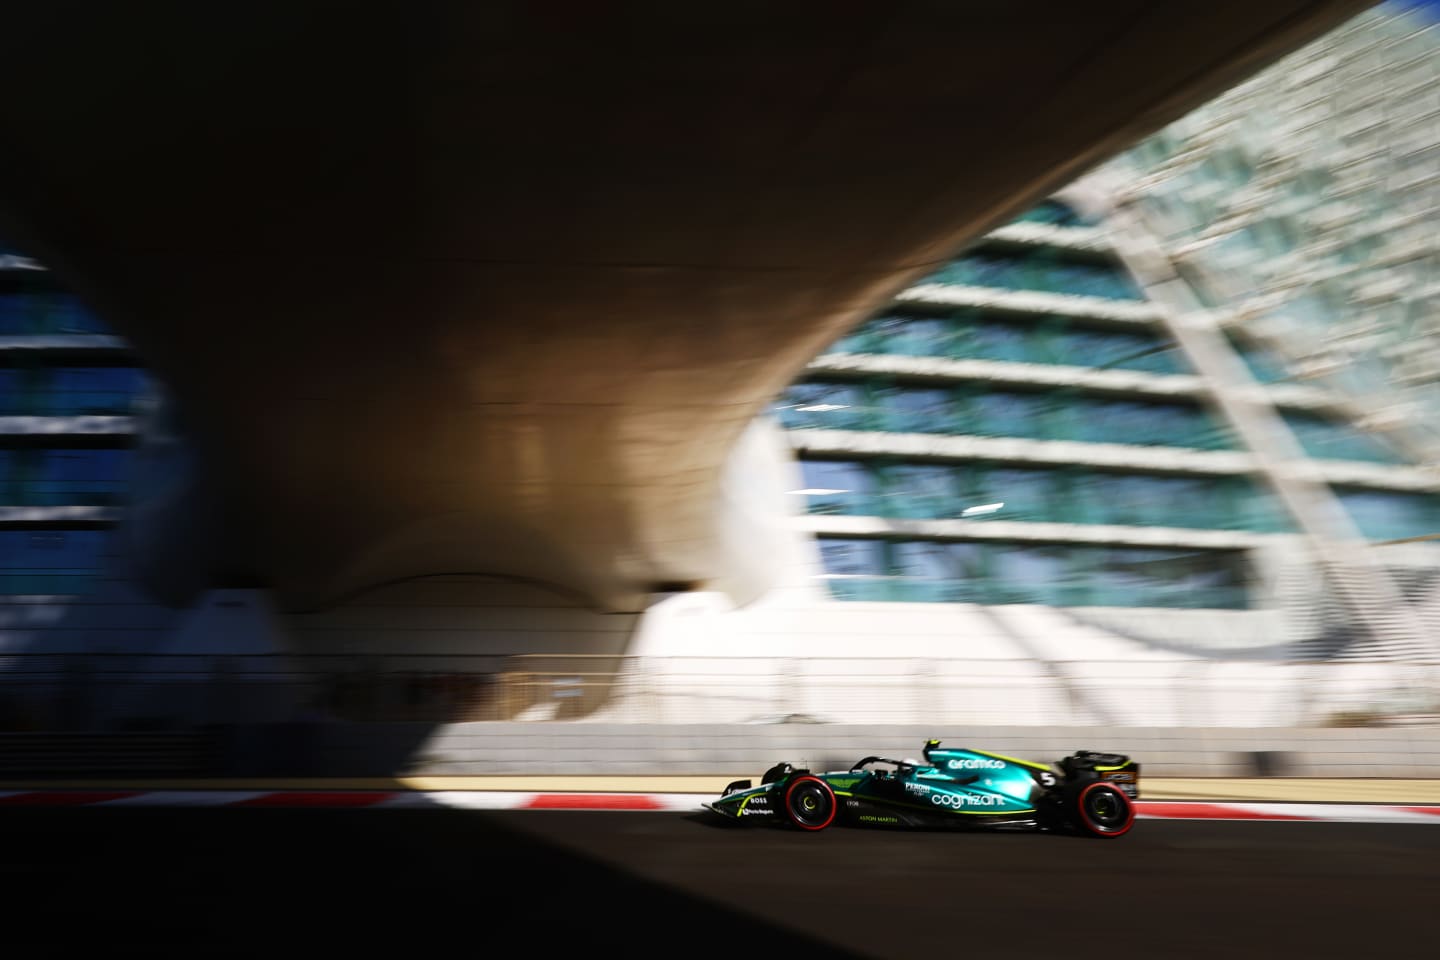 ABU DHABI, UNITED ARAB EMIRATES - NOVEMBER 18: Sebastian Vettel of Germany driving the (5) Aston Martin AMR22 Mercedes on track during practice ahead of the F1 Grand Prix of Abu Dhabi at Yas Marina Circuit on November 18, 2022 in Abu Dhabi, United Arab Emirates. (Photo by Mark Thompson/Getty Images)